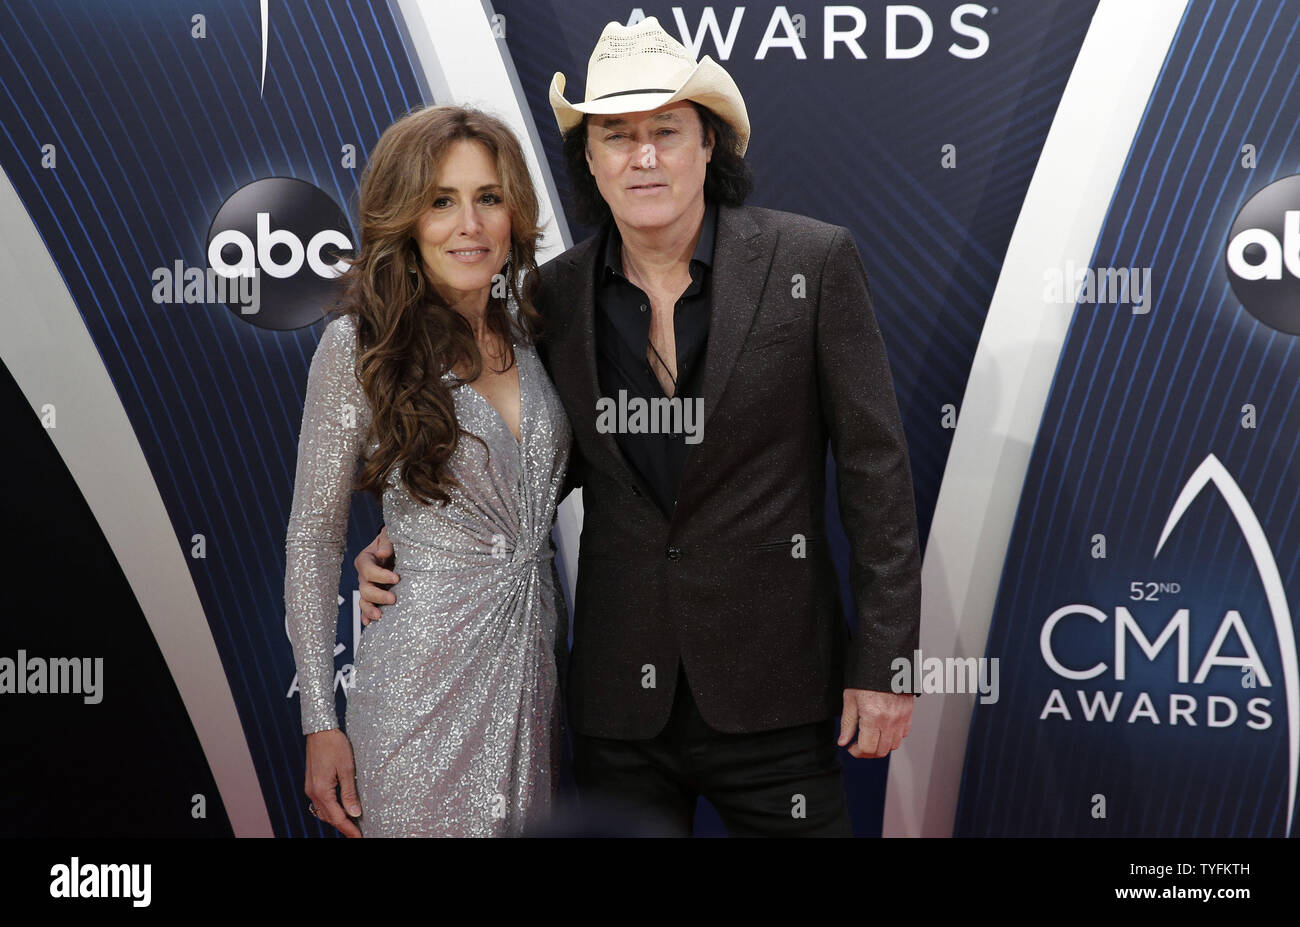 David Lee Murphy and guest arrive on the red carpet at the 52nd Annual  Country Music